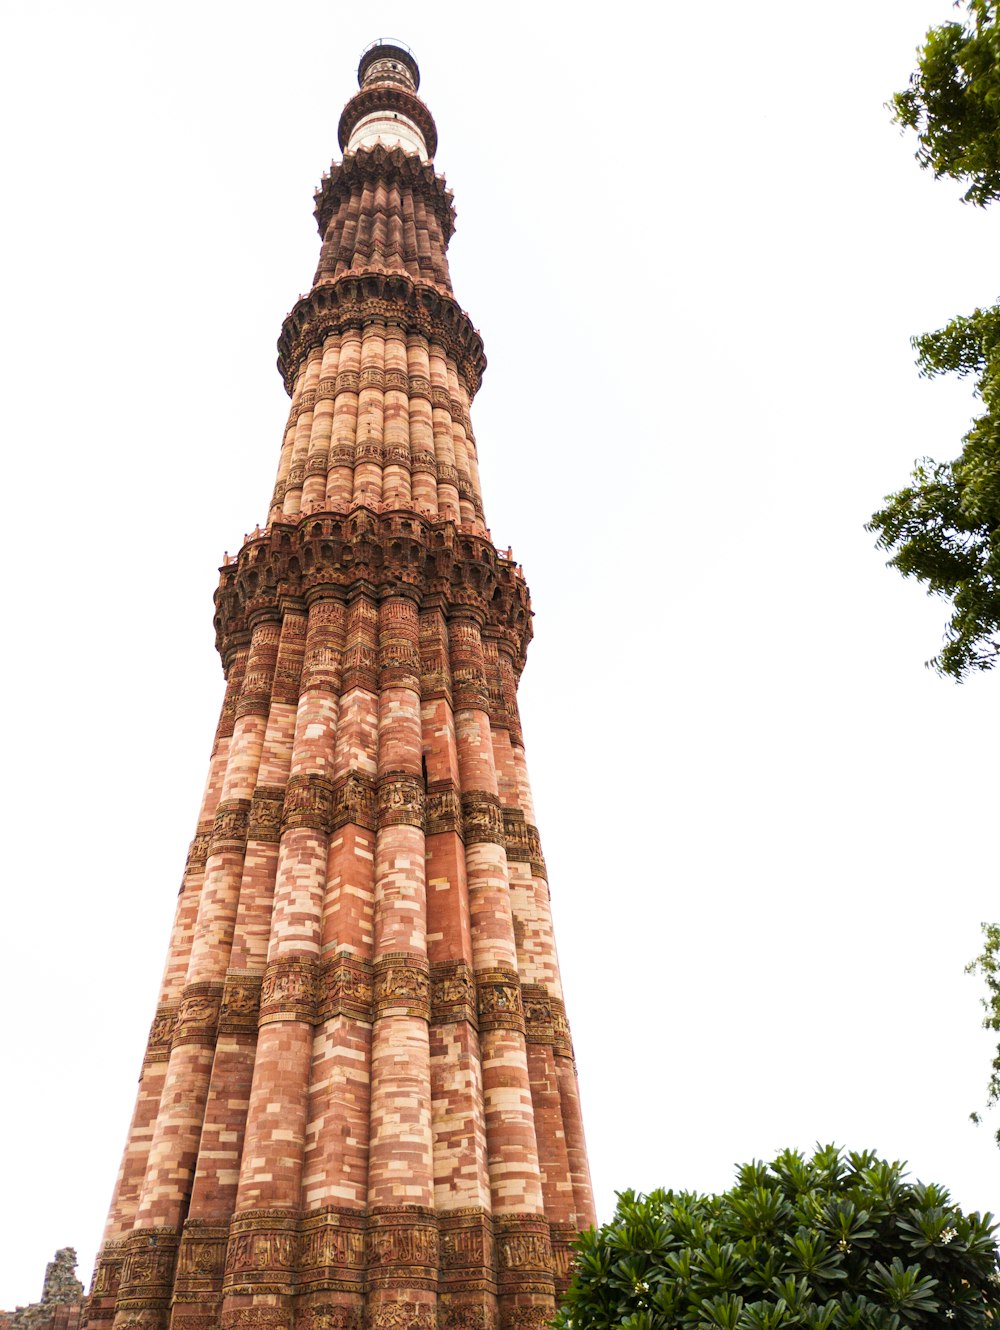 a tall tower with trees around it with Qutub Minar in the background